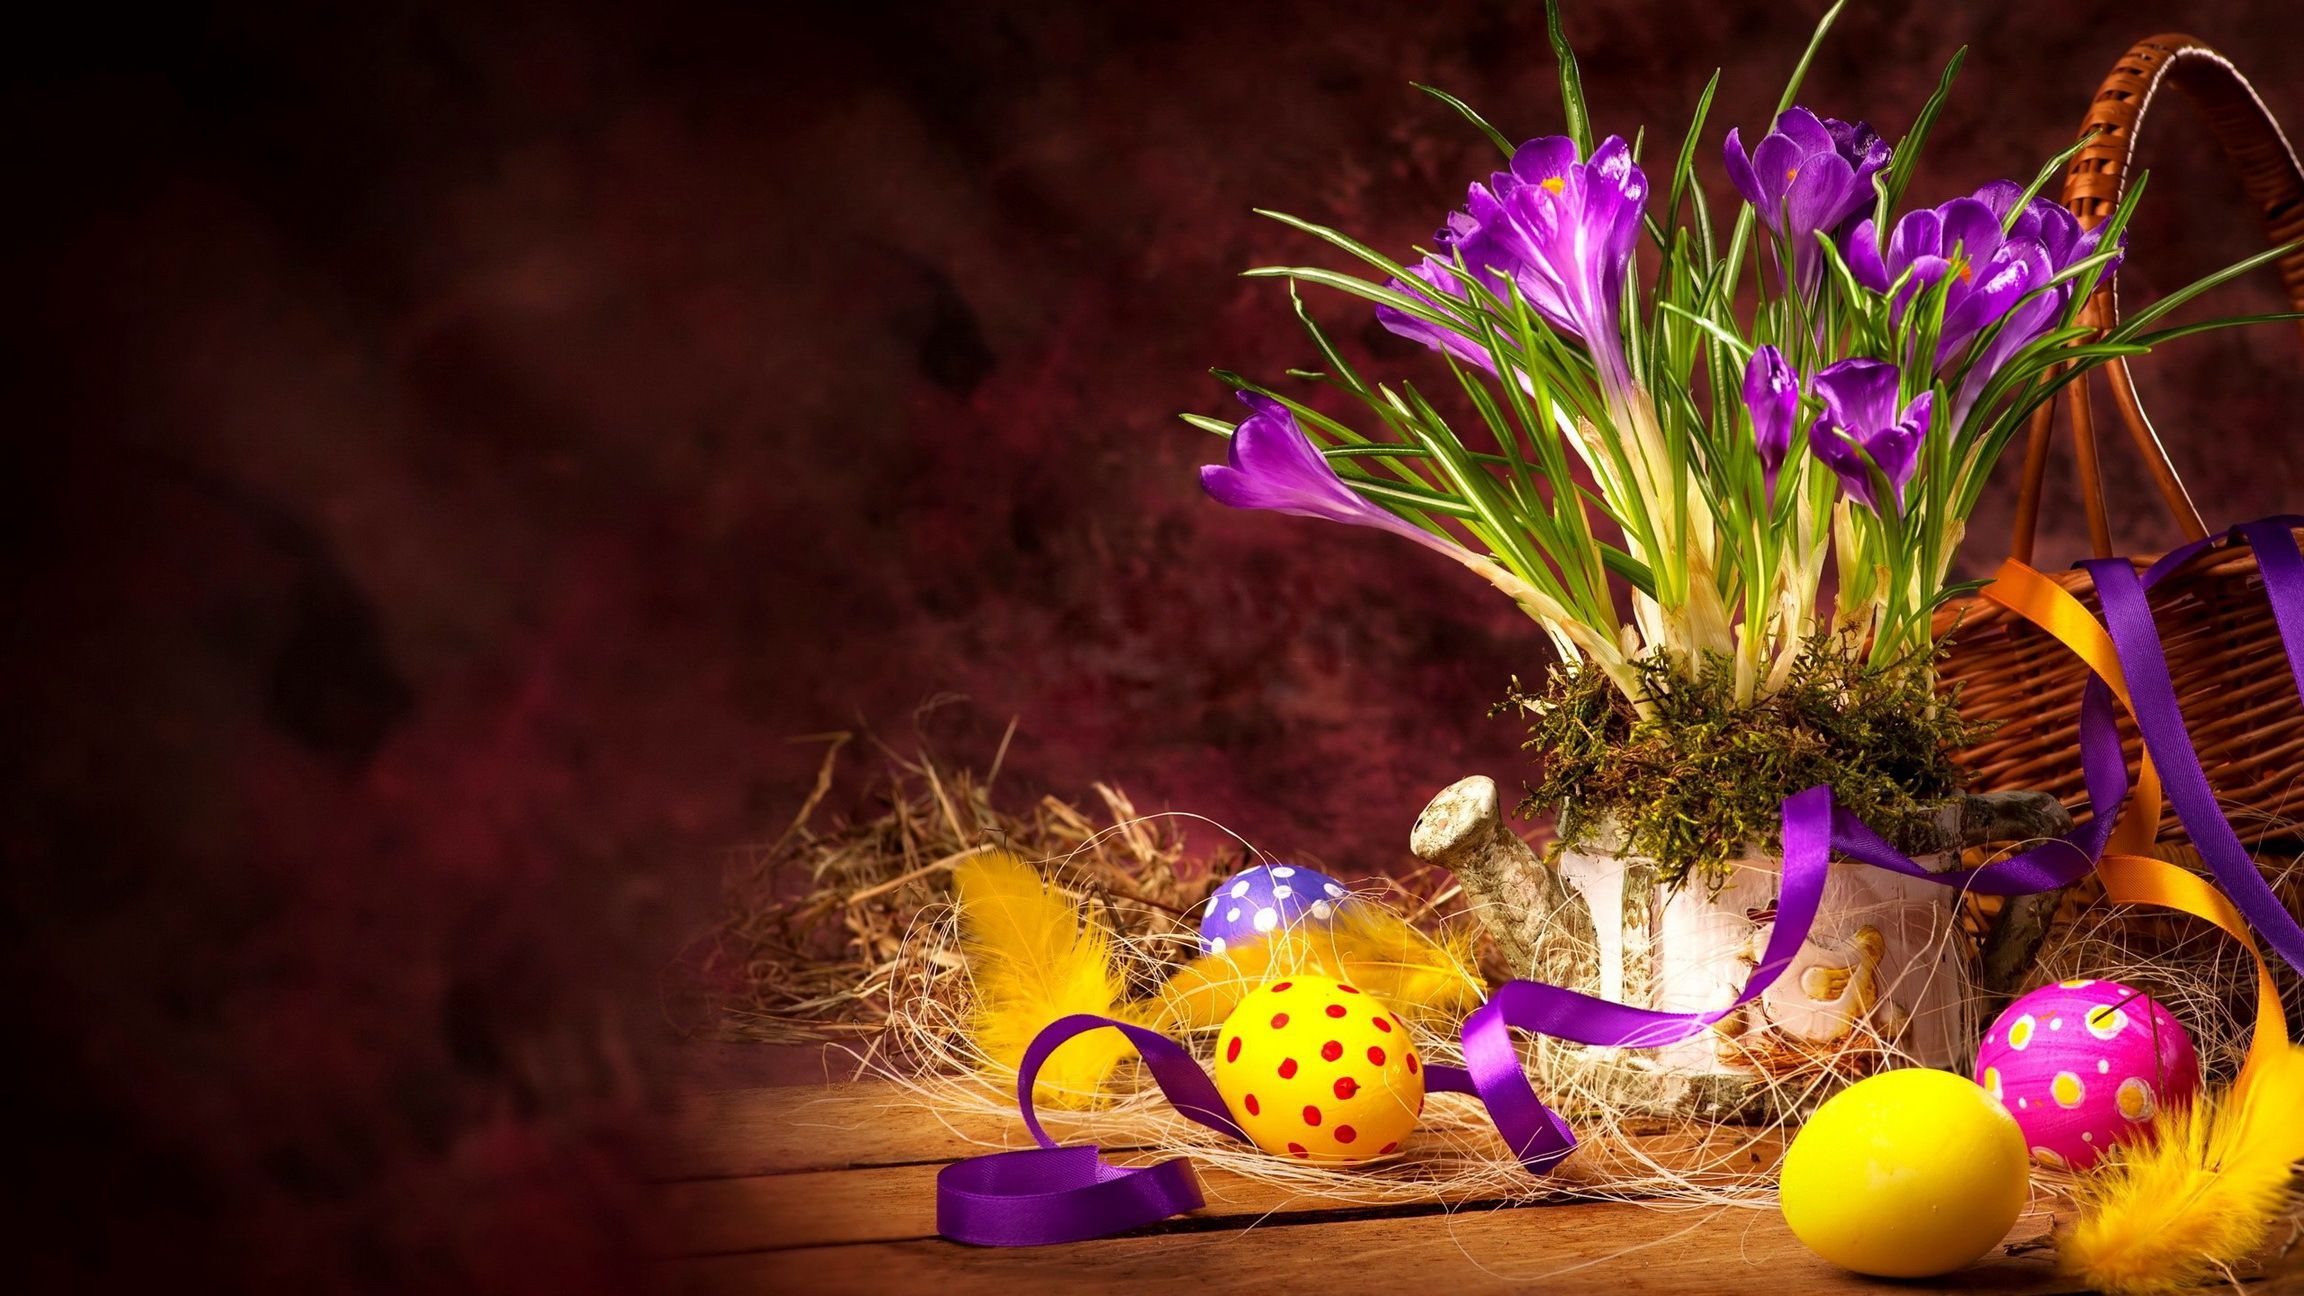 Easter Desktop Backgrounds | One HD Wallpaper Pictures Backgrounds ...